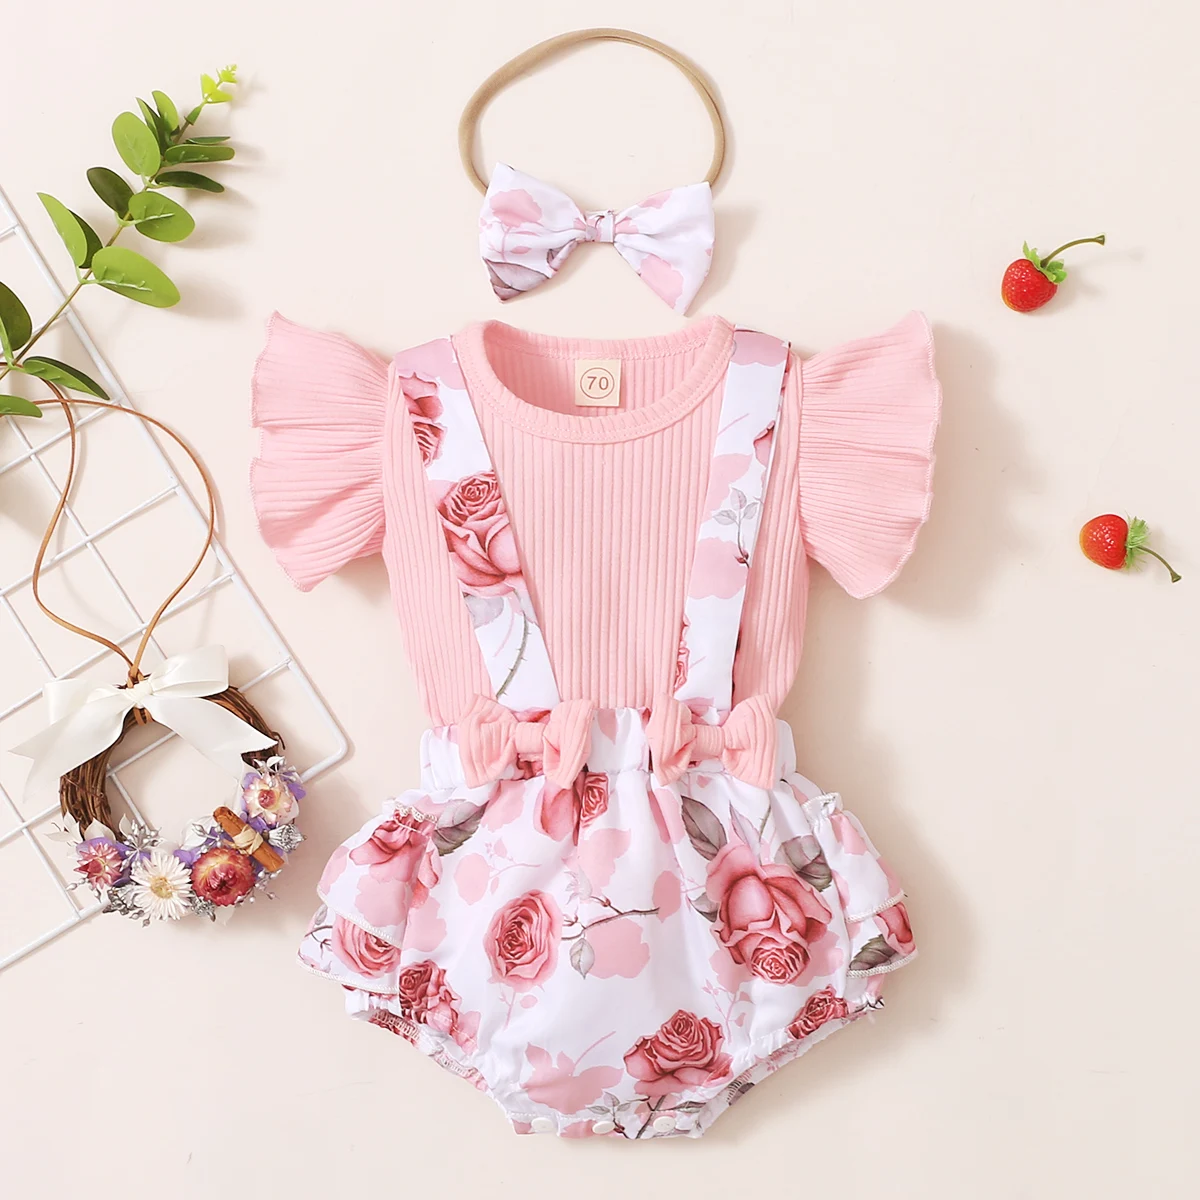 small baby clothing set	 FOCUSNORM 0-18M 3pcs Infant Baby Girls Clothes Sets Ruffles Fly Sleeve Solid T Shirts Flowers Overalls Shorts Headband baby clothing set line